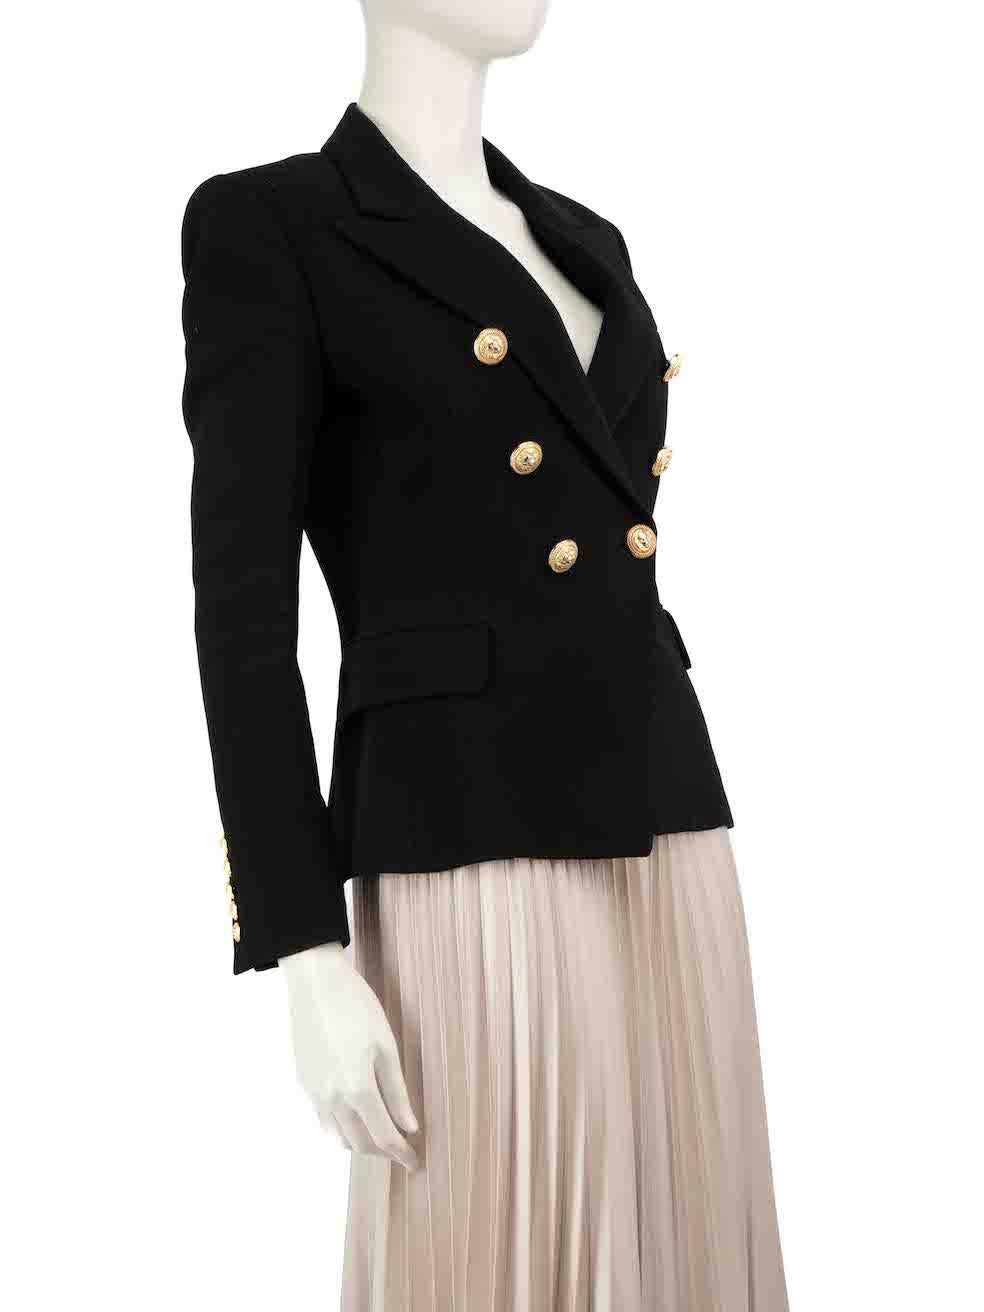 CONDITION is Very good. Hardly any visible wear to jacket is evident on this used Balmain designer resale item.
 
 
 
 Details
 
 
 Black
 
 Viscose
 
 Blazer
 
 Double breasted
 
 Gold button detail
 
 Shoulder pads
 
 Button up fastening
 
